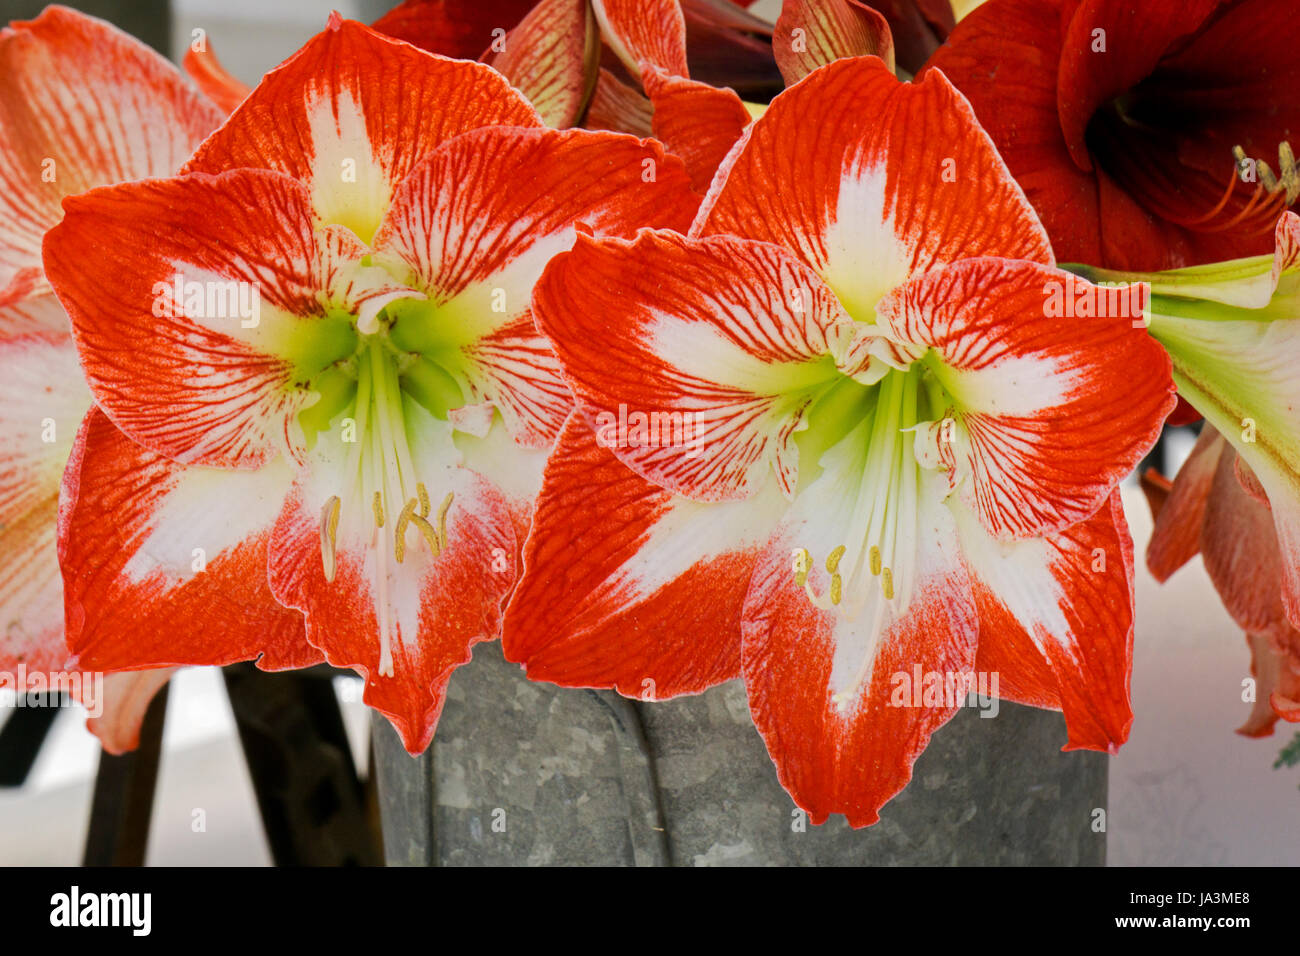 Two beautiful red and white amaryllis flowers for sale at an outdoor market in downtown Manhattan, New York City. Stock Photo